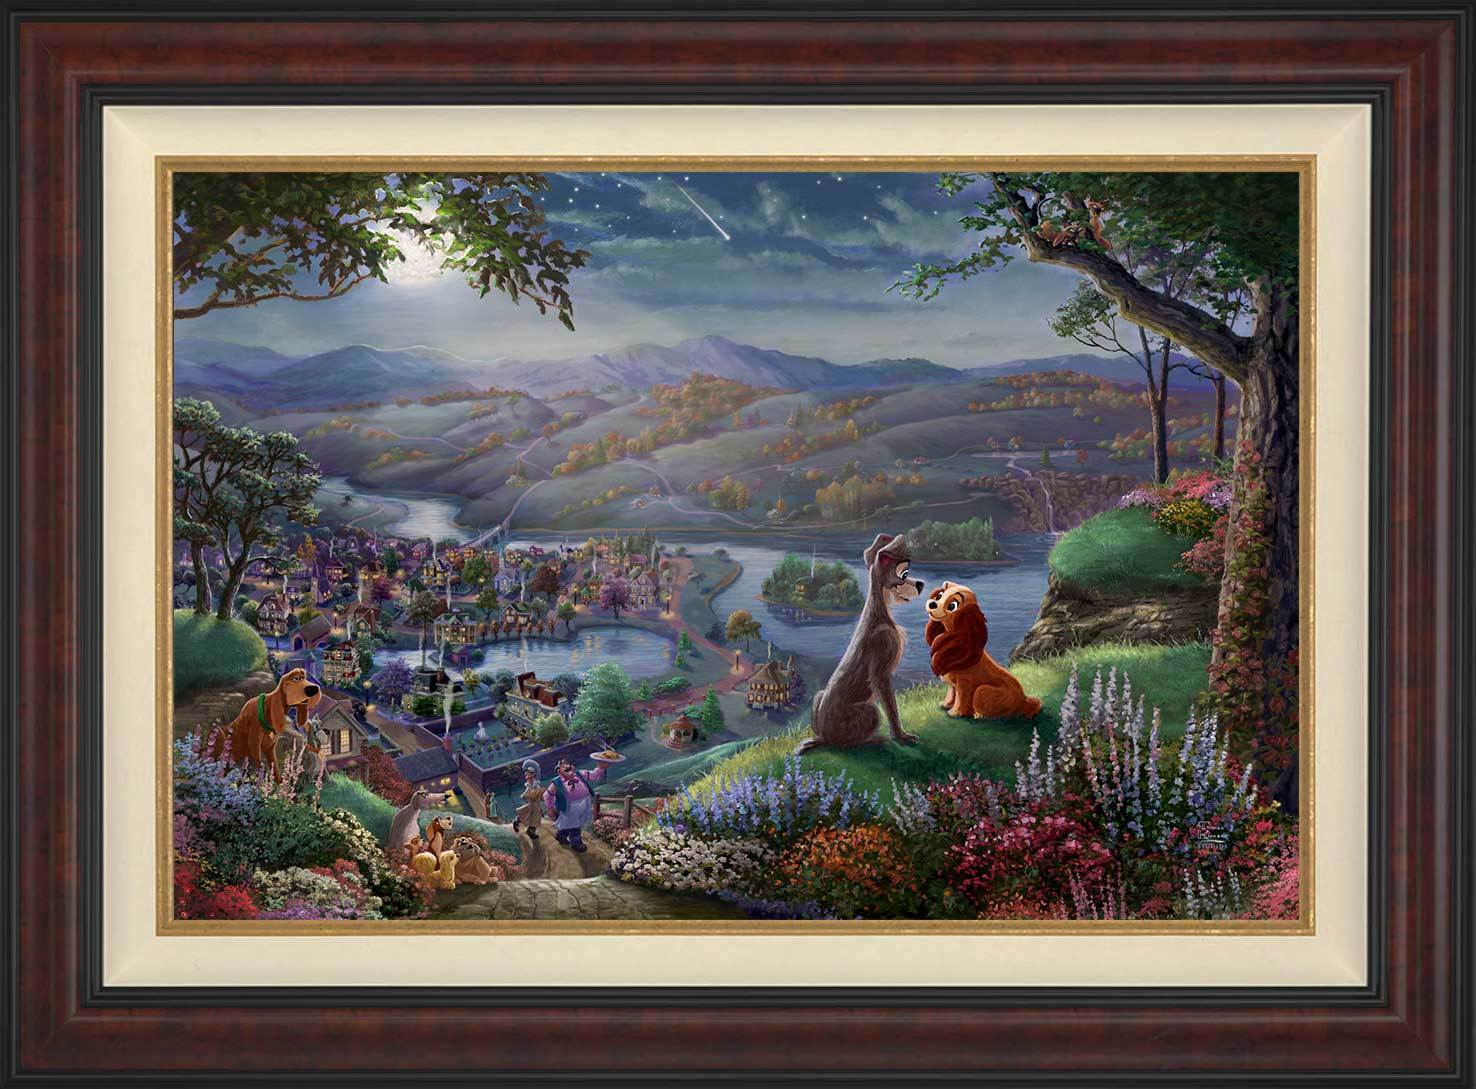  Lady and the Tramp sit gazing into each other’s eyes and falling-in-love, they are seemingly unaware of the world around them - in Burl Frame